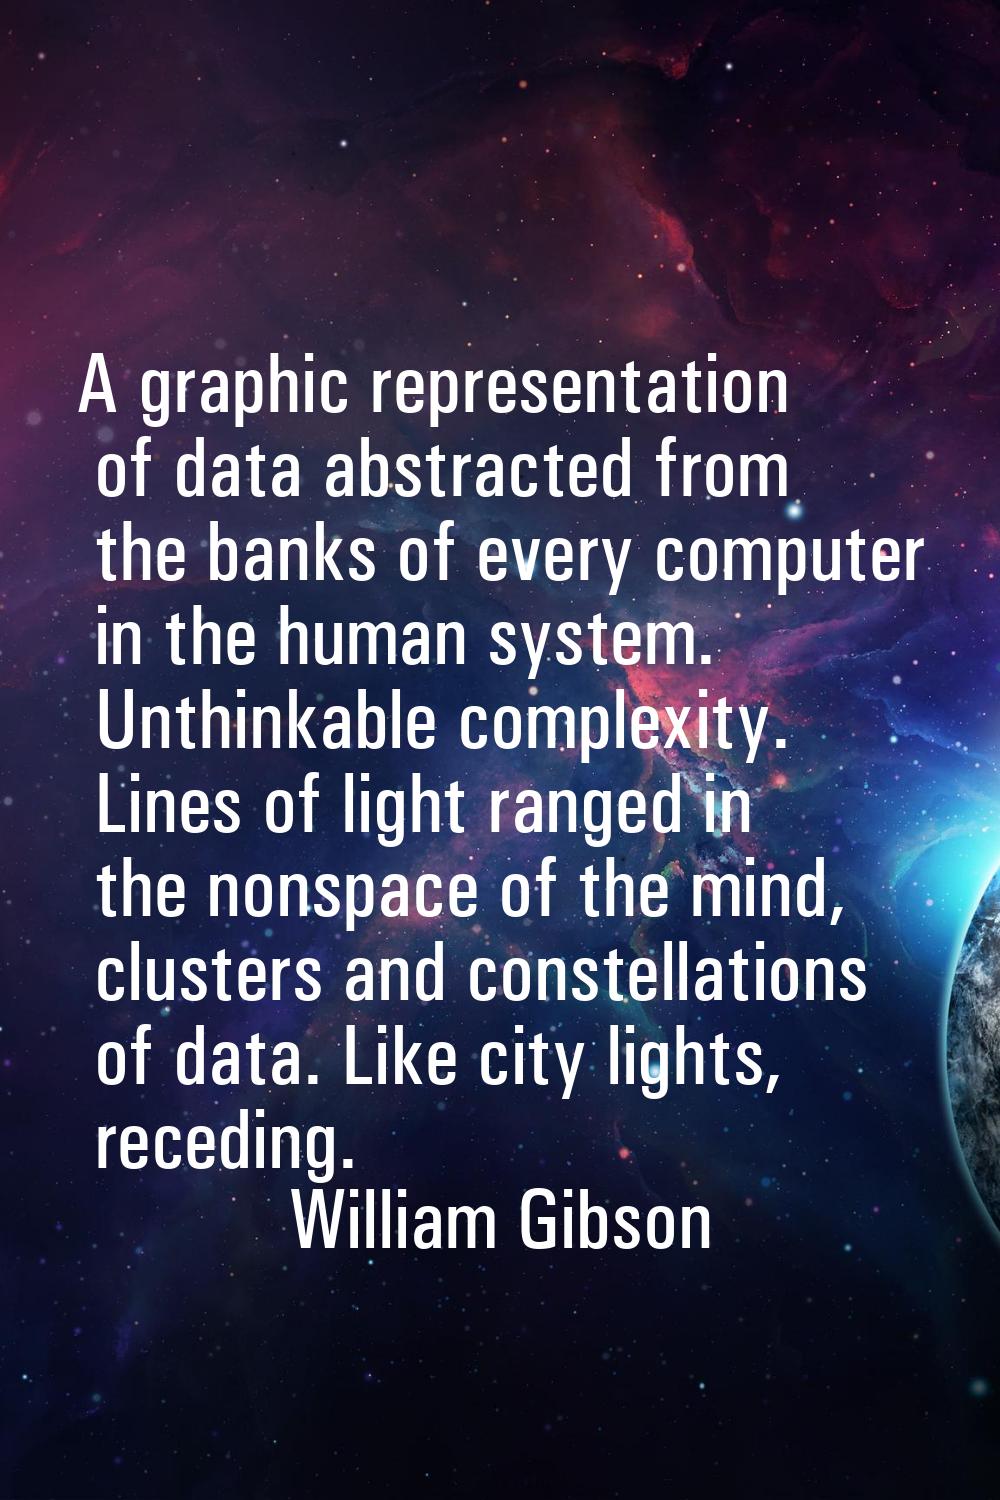 A graphic representation of data abstracted from the banks of every computer in the human system. U